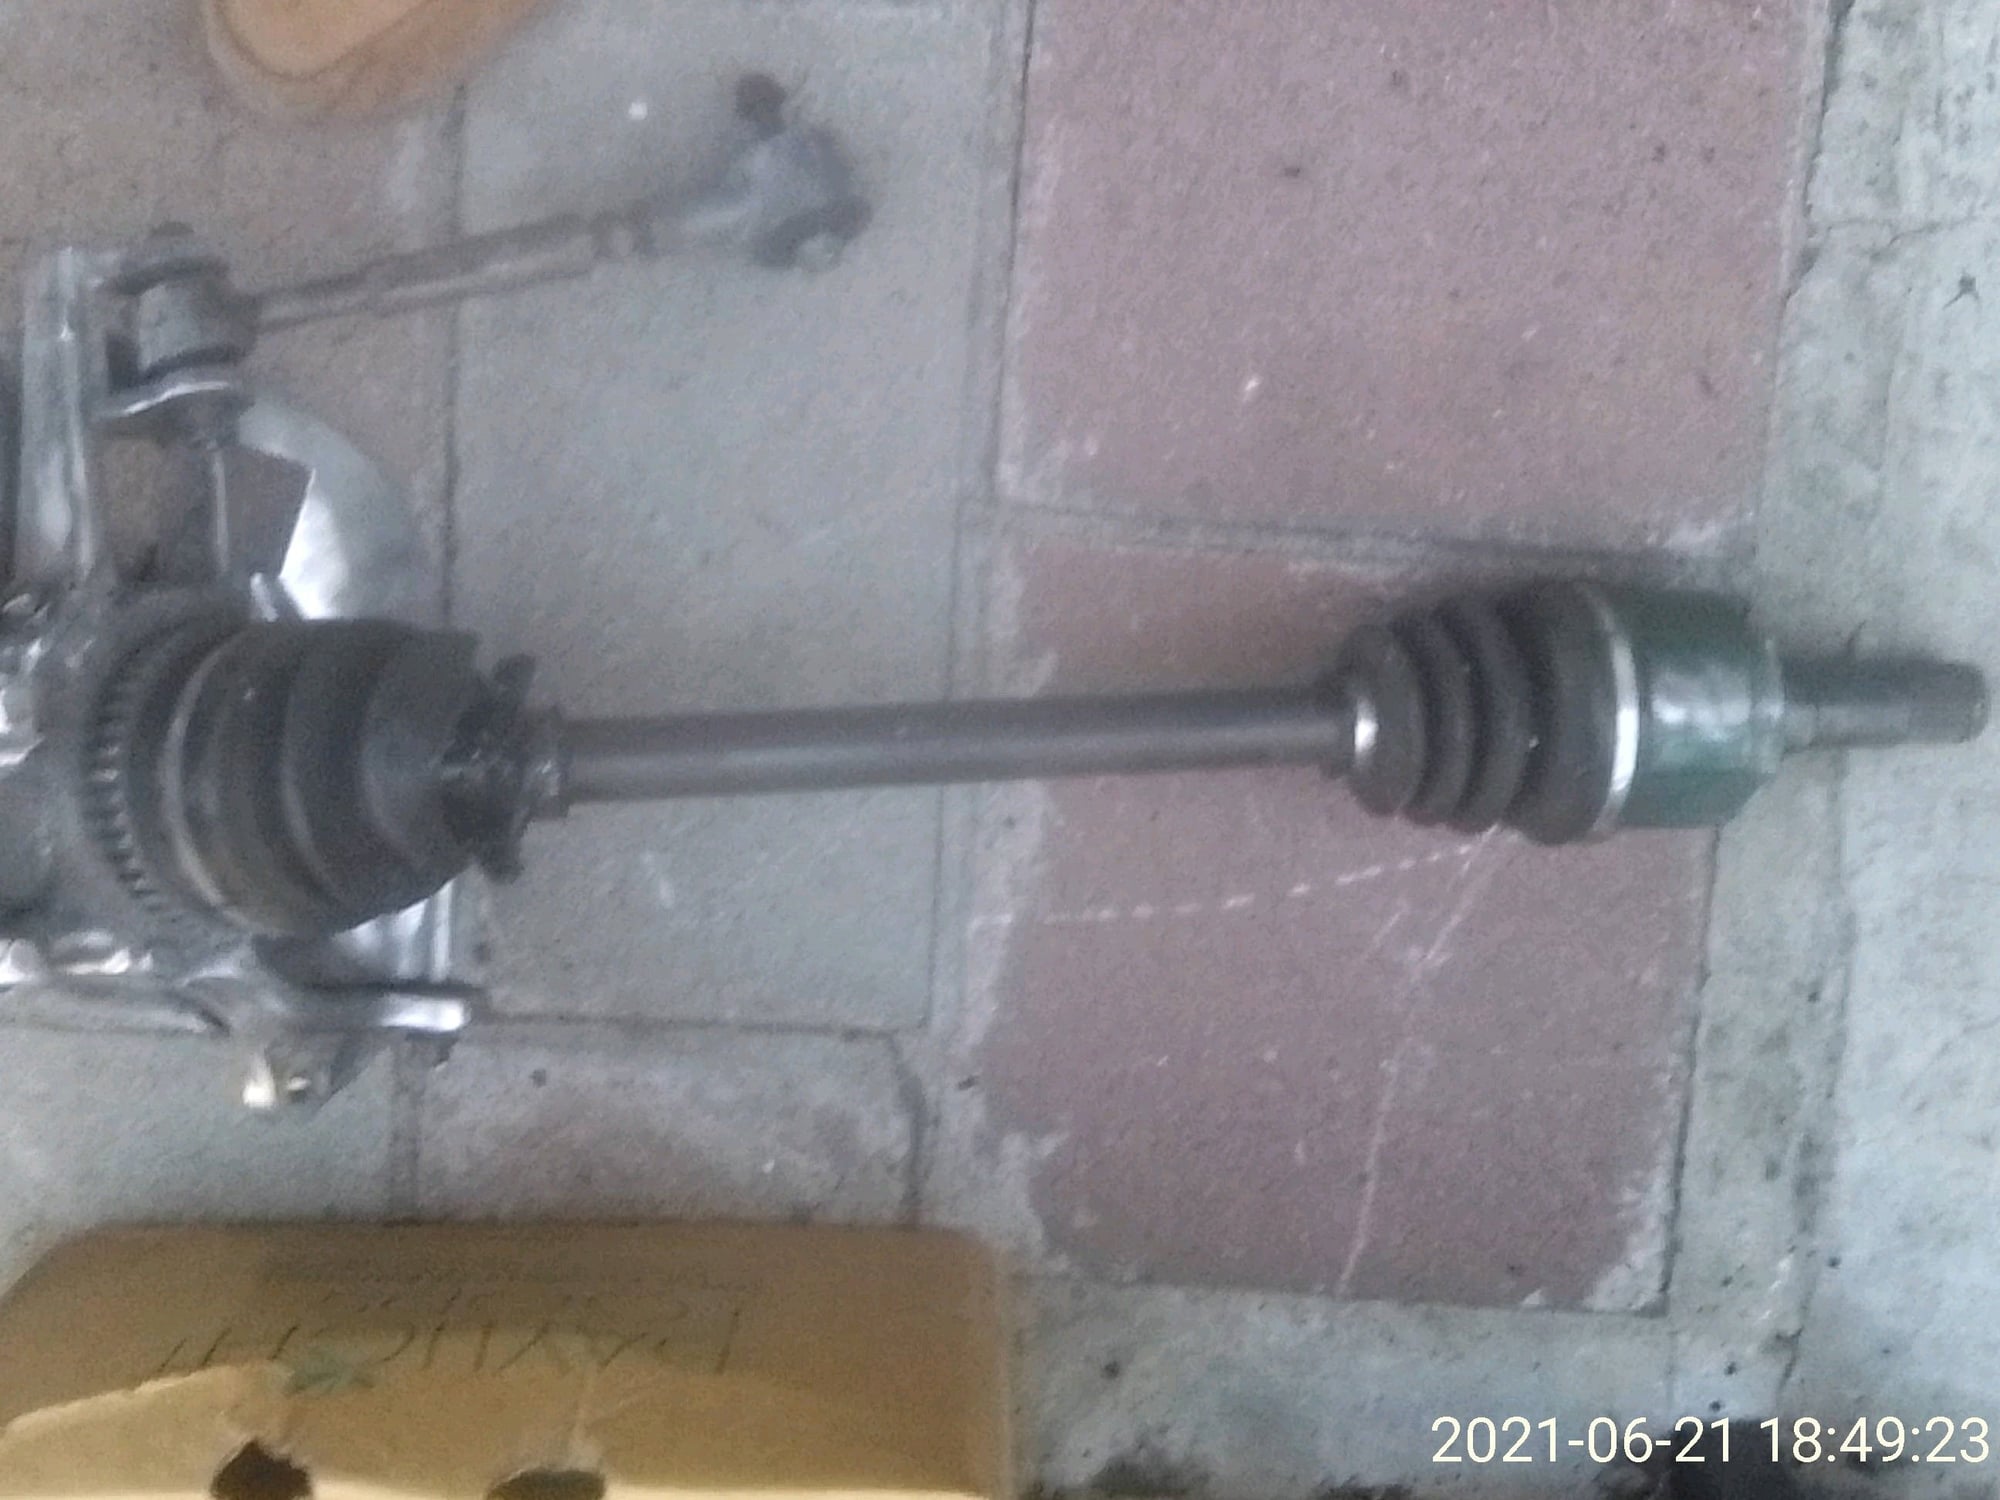 Steering/Suspension - FD3S OEM Left Rear Axel CV - Used - 1993 to 2002 Mazda RX-7 - San Jose, CA 95121, United States